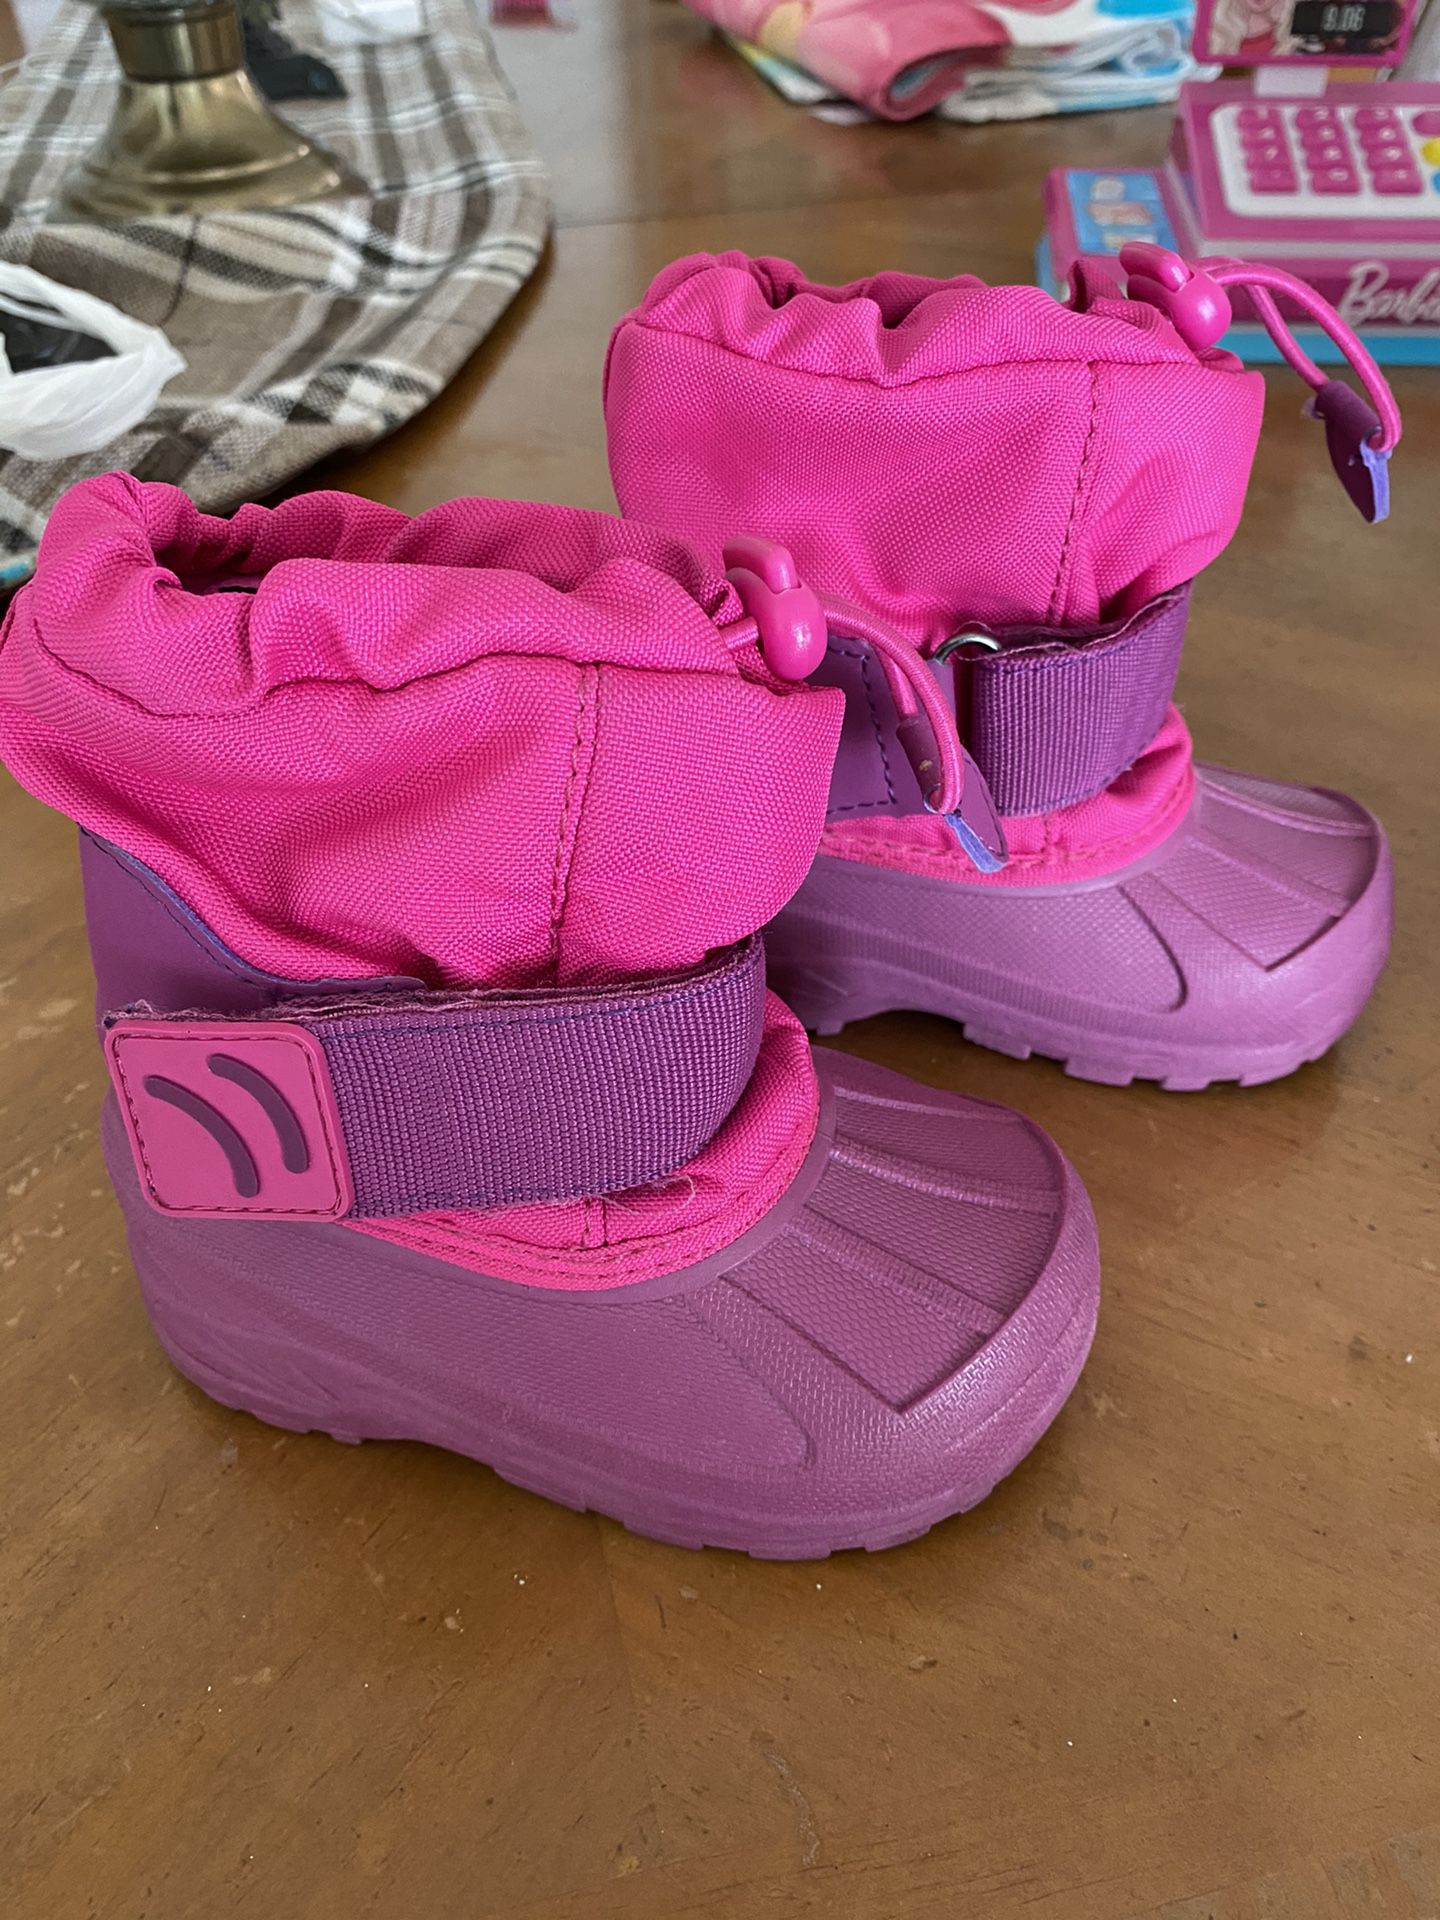 Snow boots Size toddler 5-6